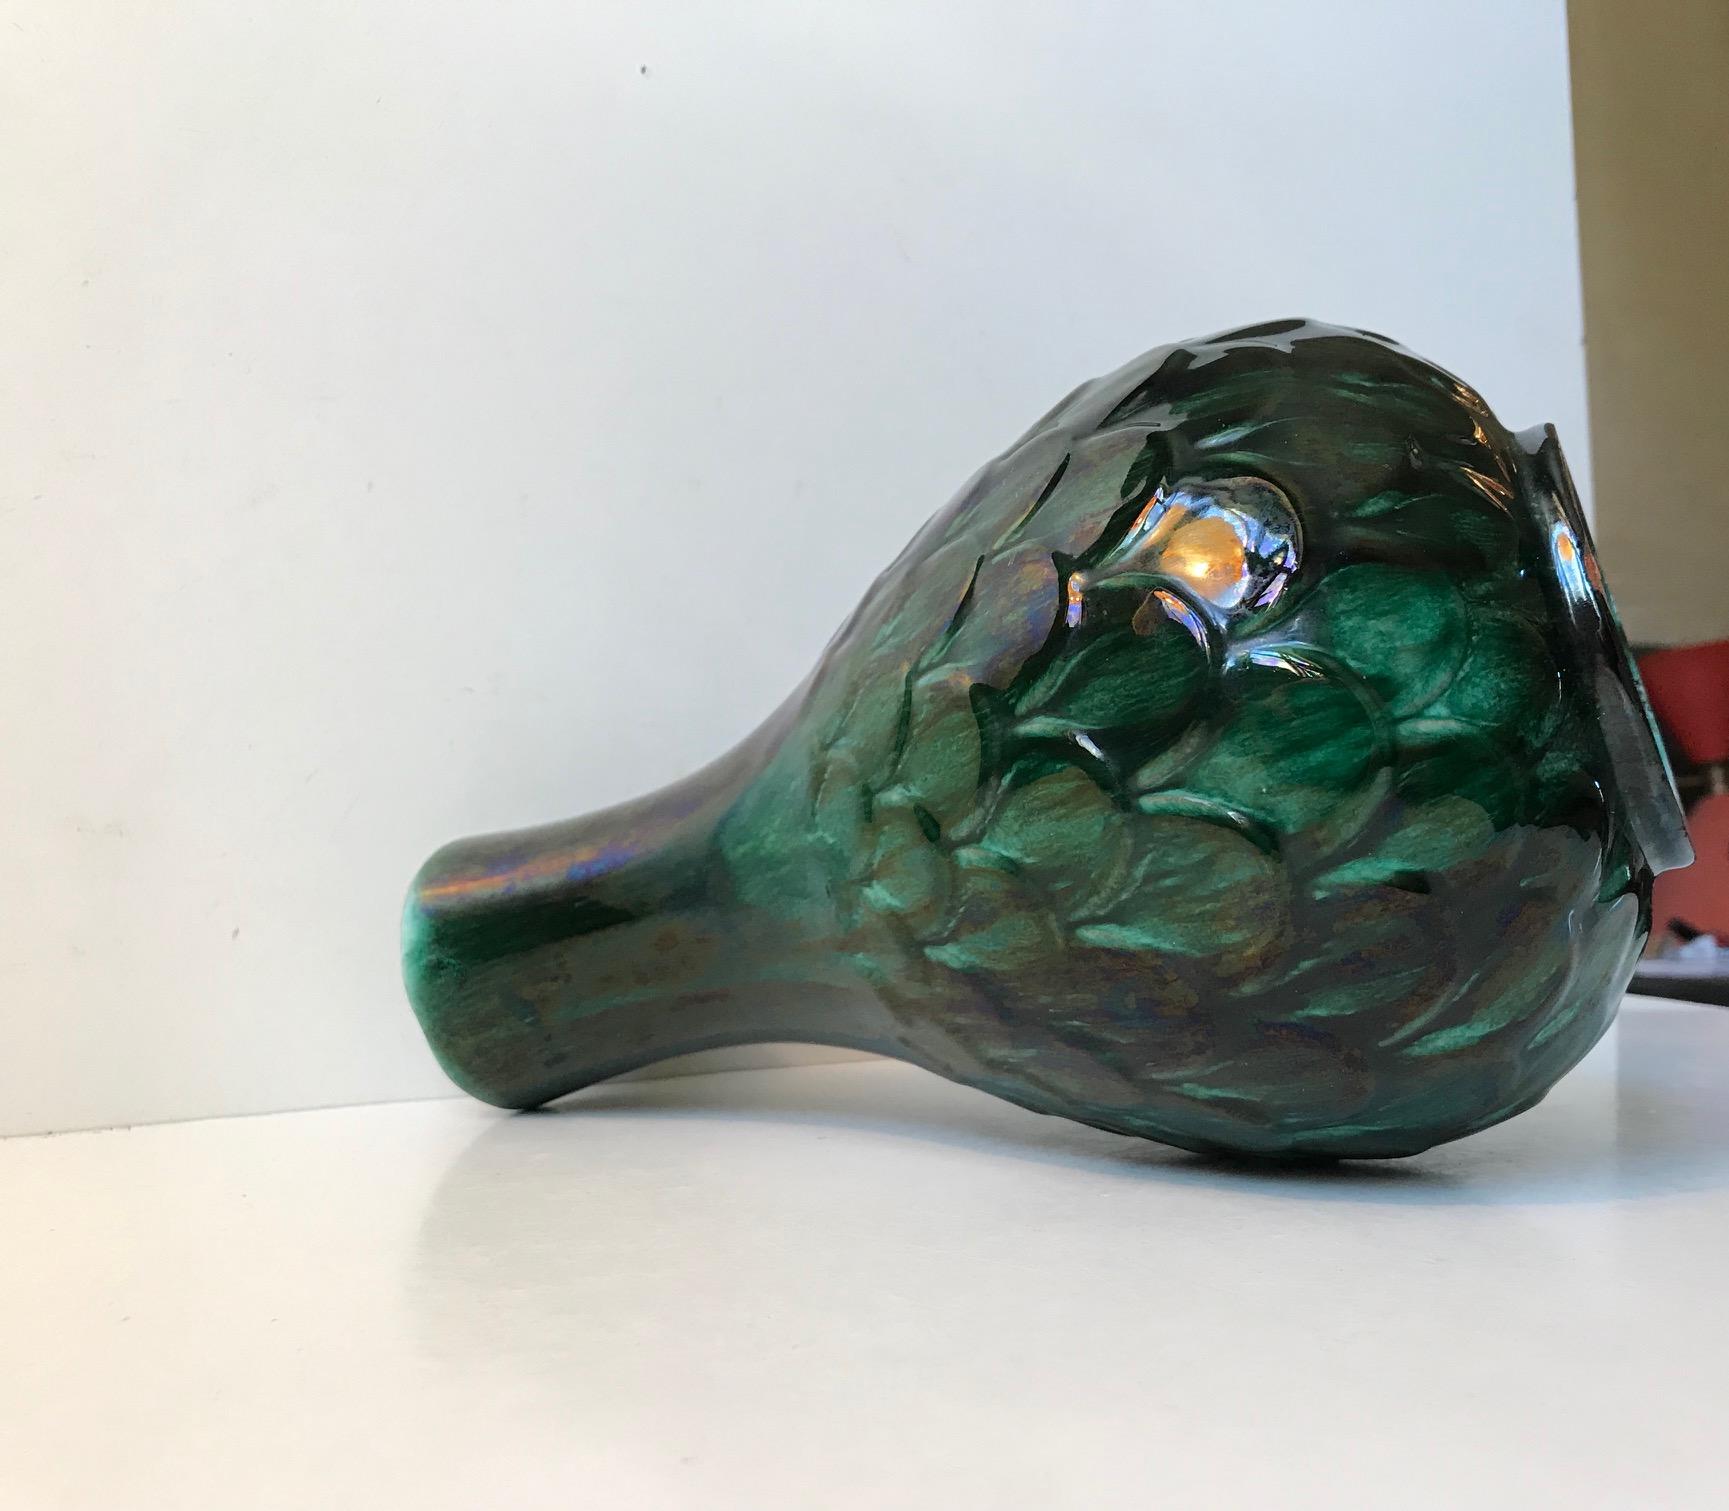 - A voluminous pottery vase with dragon scale or Artichoke pattern relief
- Stunning glossy green glaze
- Designed by Vicke Lindstrand for Upsala Ekeby in the 1940s
- It is marked with designer initials and makers mark
- Please read the